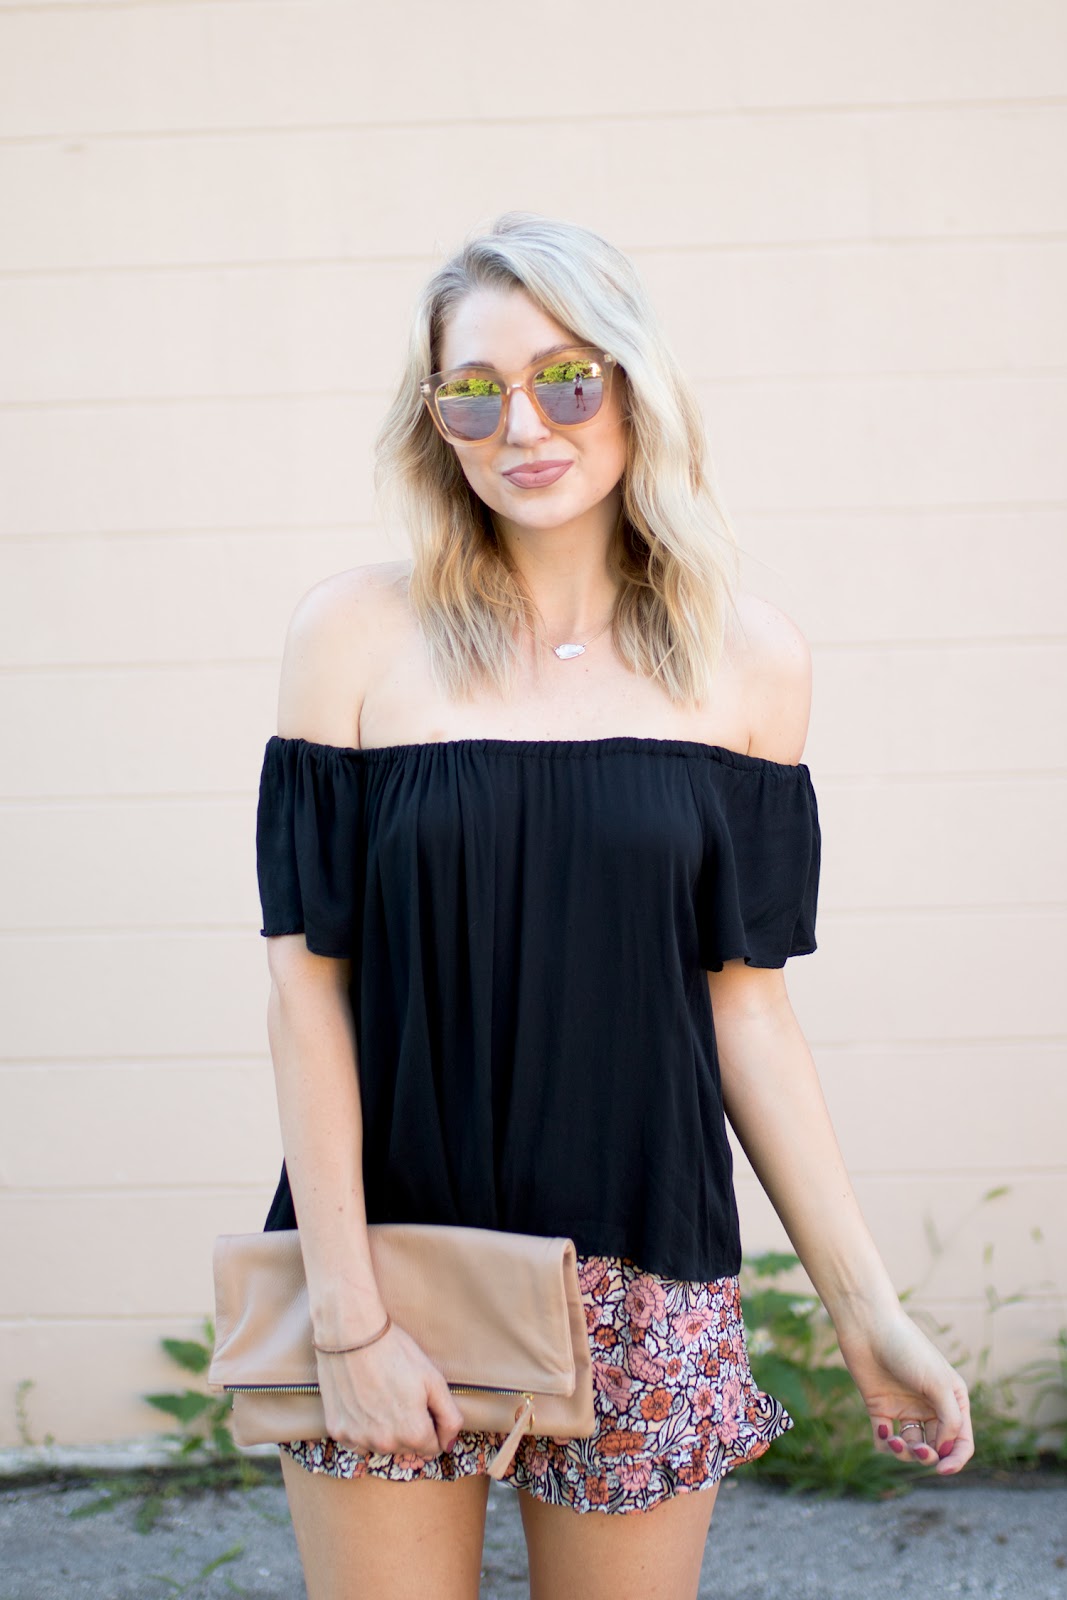 Off-the-shoulder top + ruffled shorts